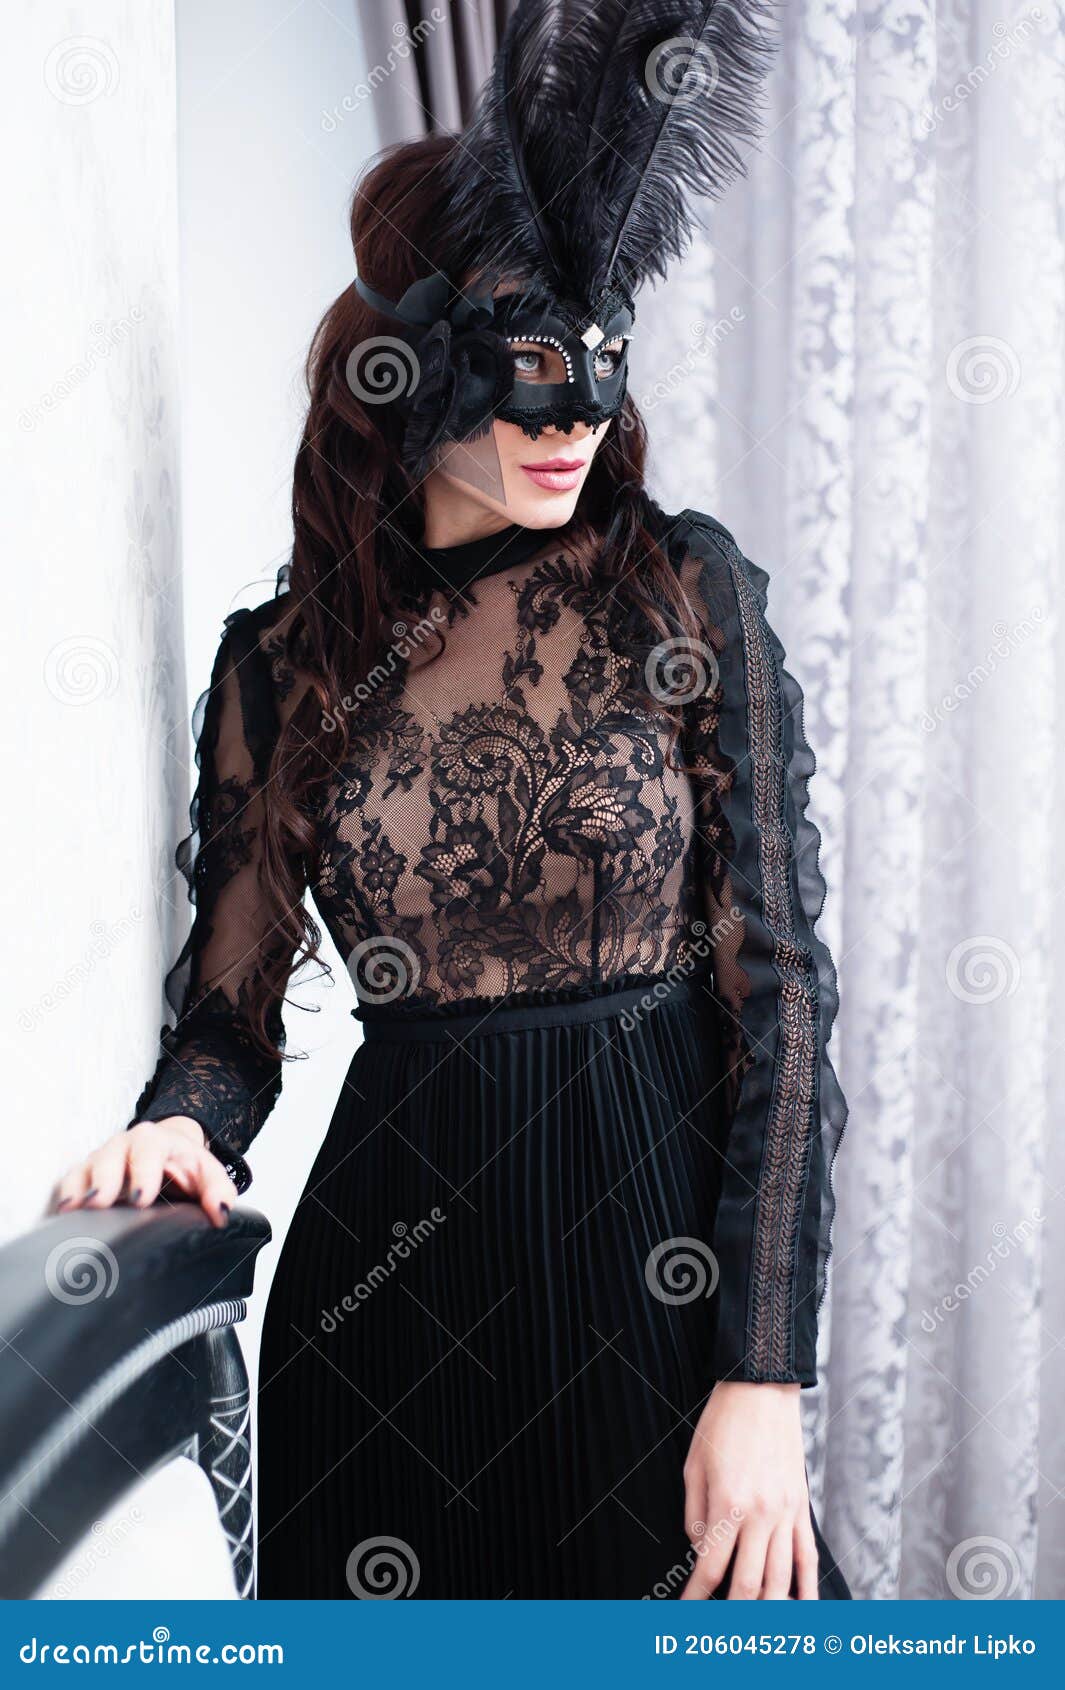 glamorous brunette lady with a beautiful hairstyle and red lips, in an evening dress, a venetian black mask with stylish accessori